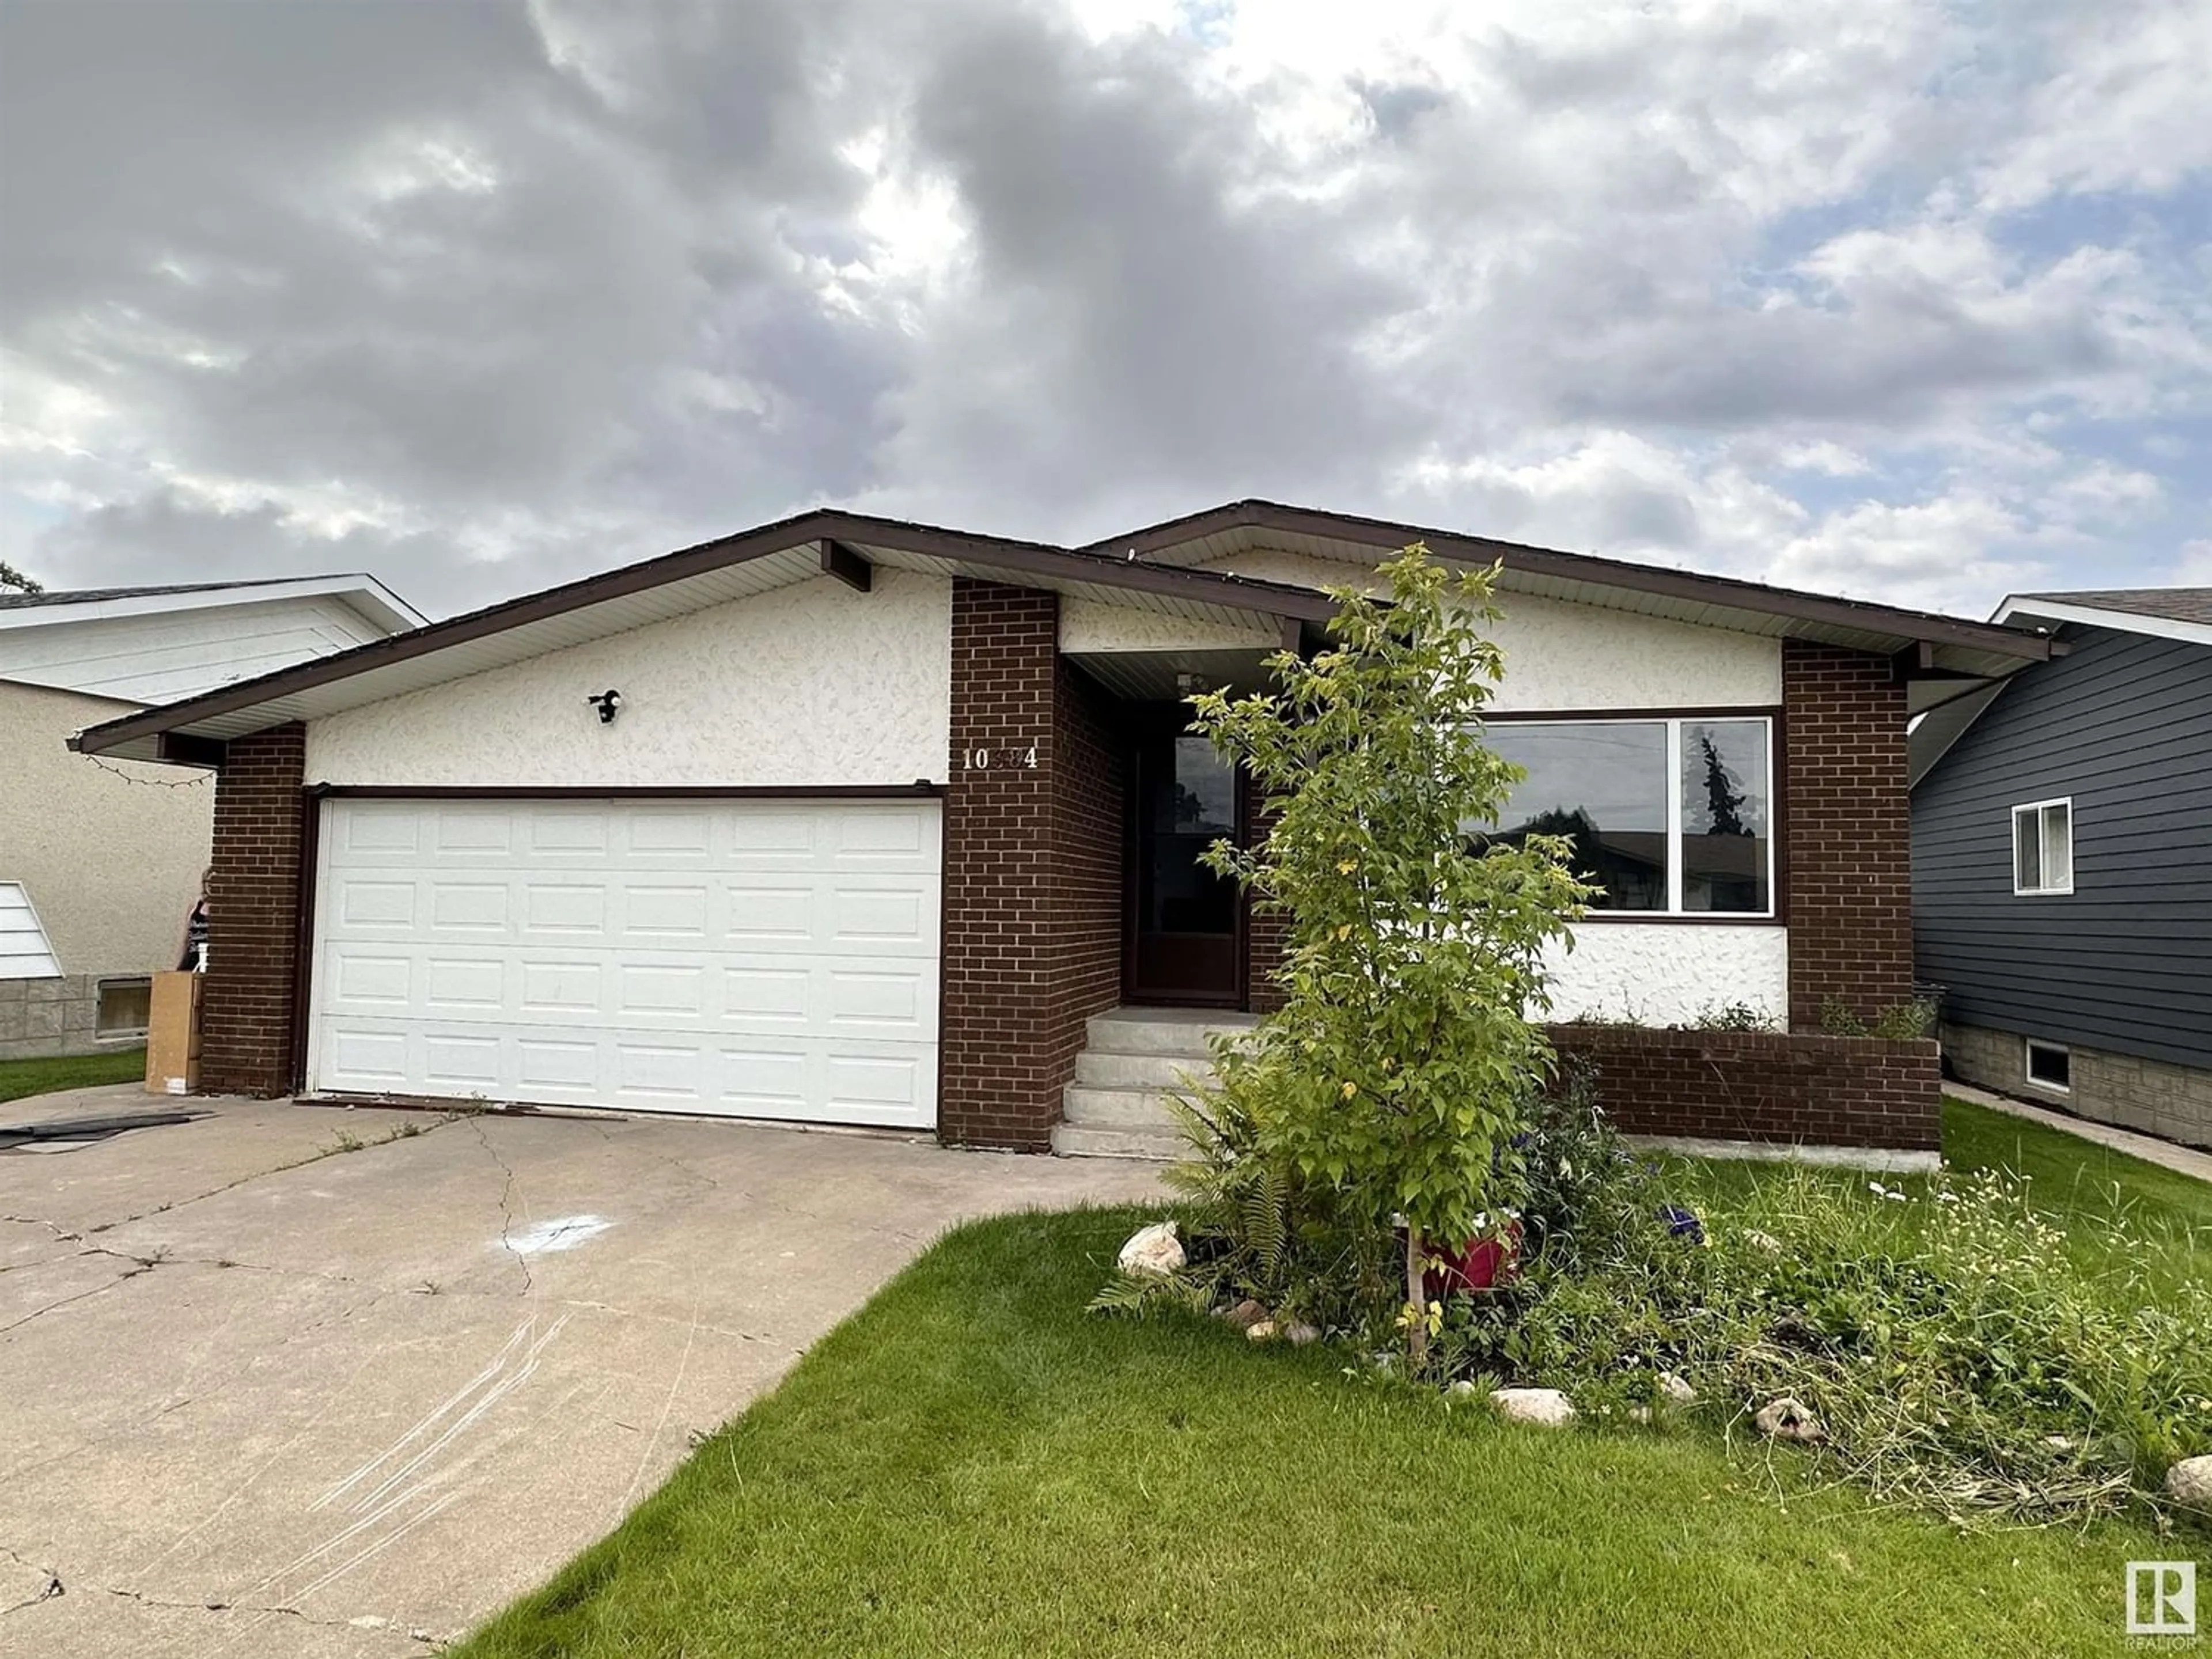 Frontside or backside of a home for 10384 107 A Ave., Westlock Alberta T7P1J5